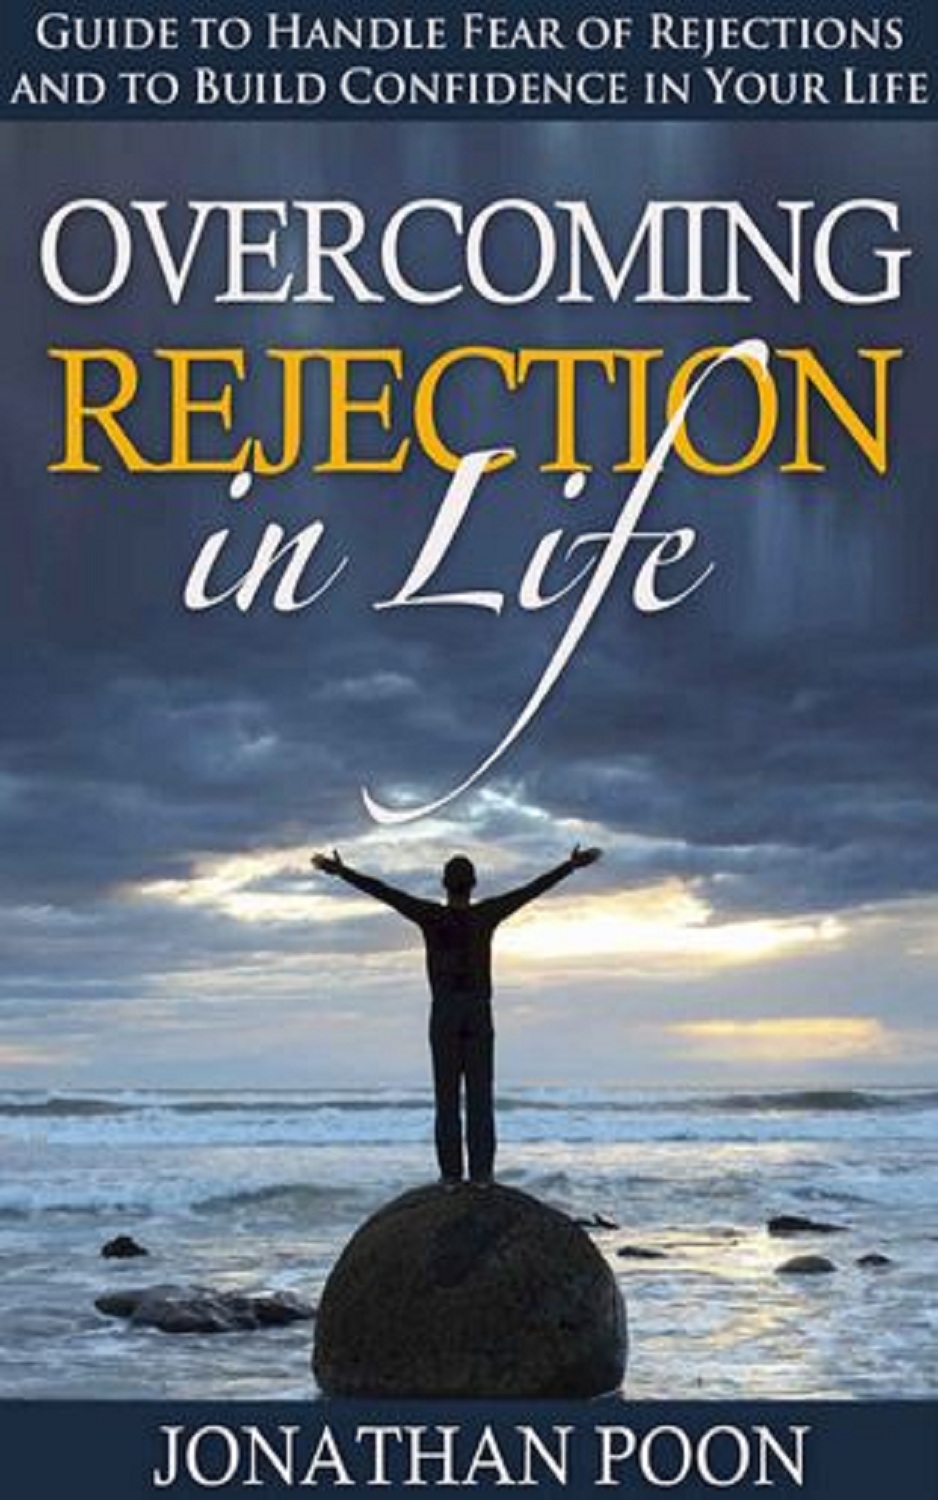 FREE: Rejection: Guide to Handle Fear of Rejections and to Build Confidence in Your Life by Jonathan Poon